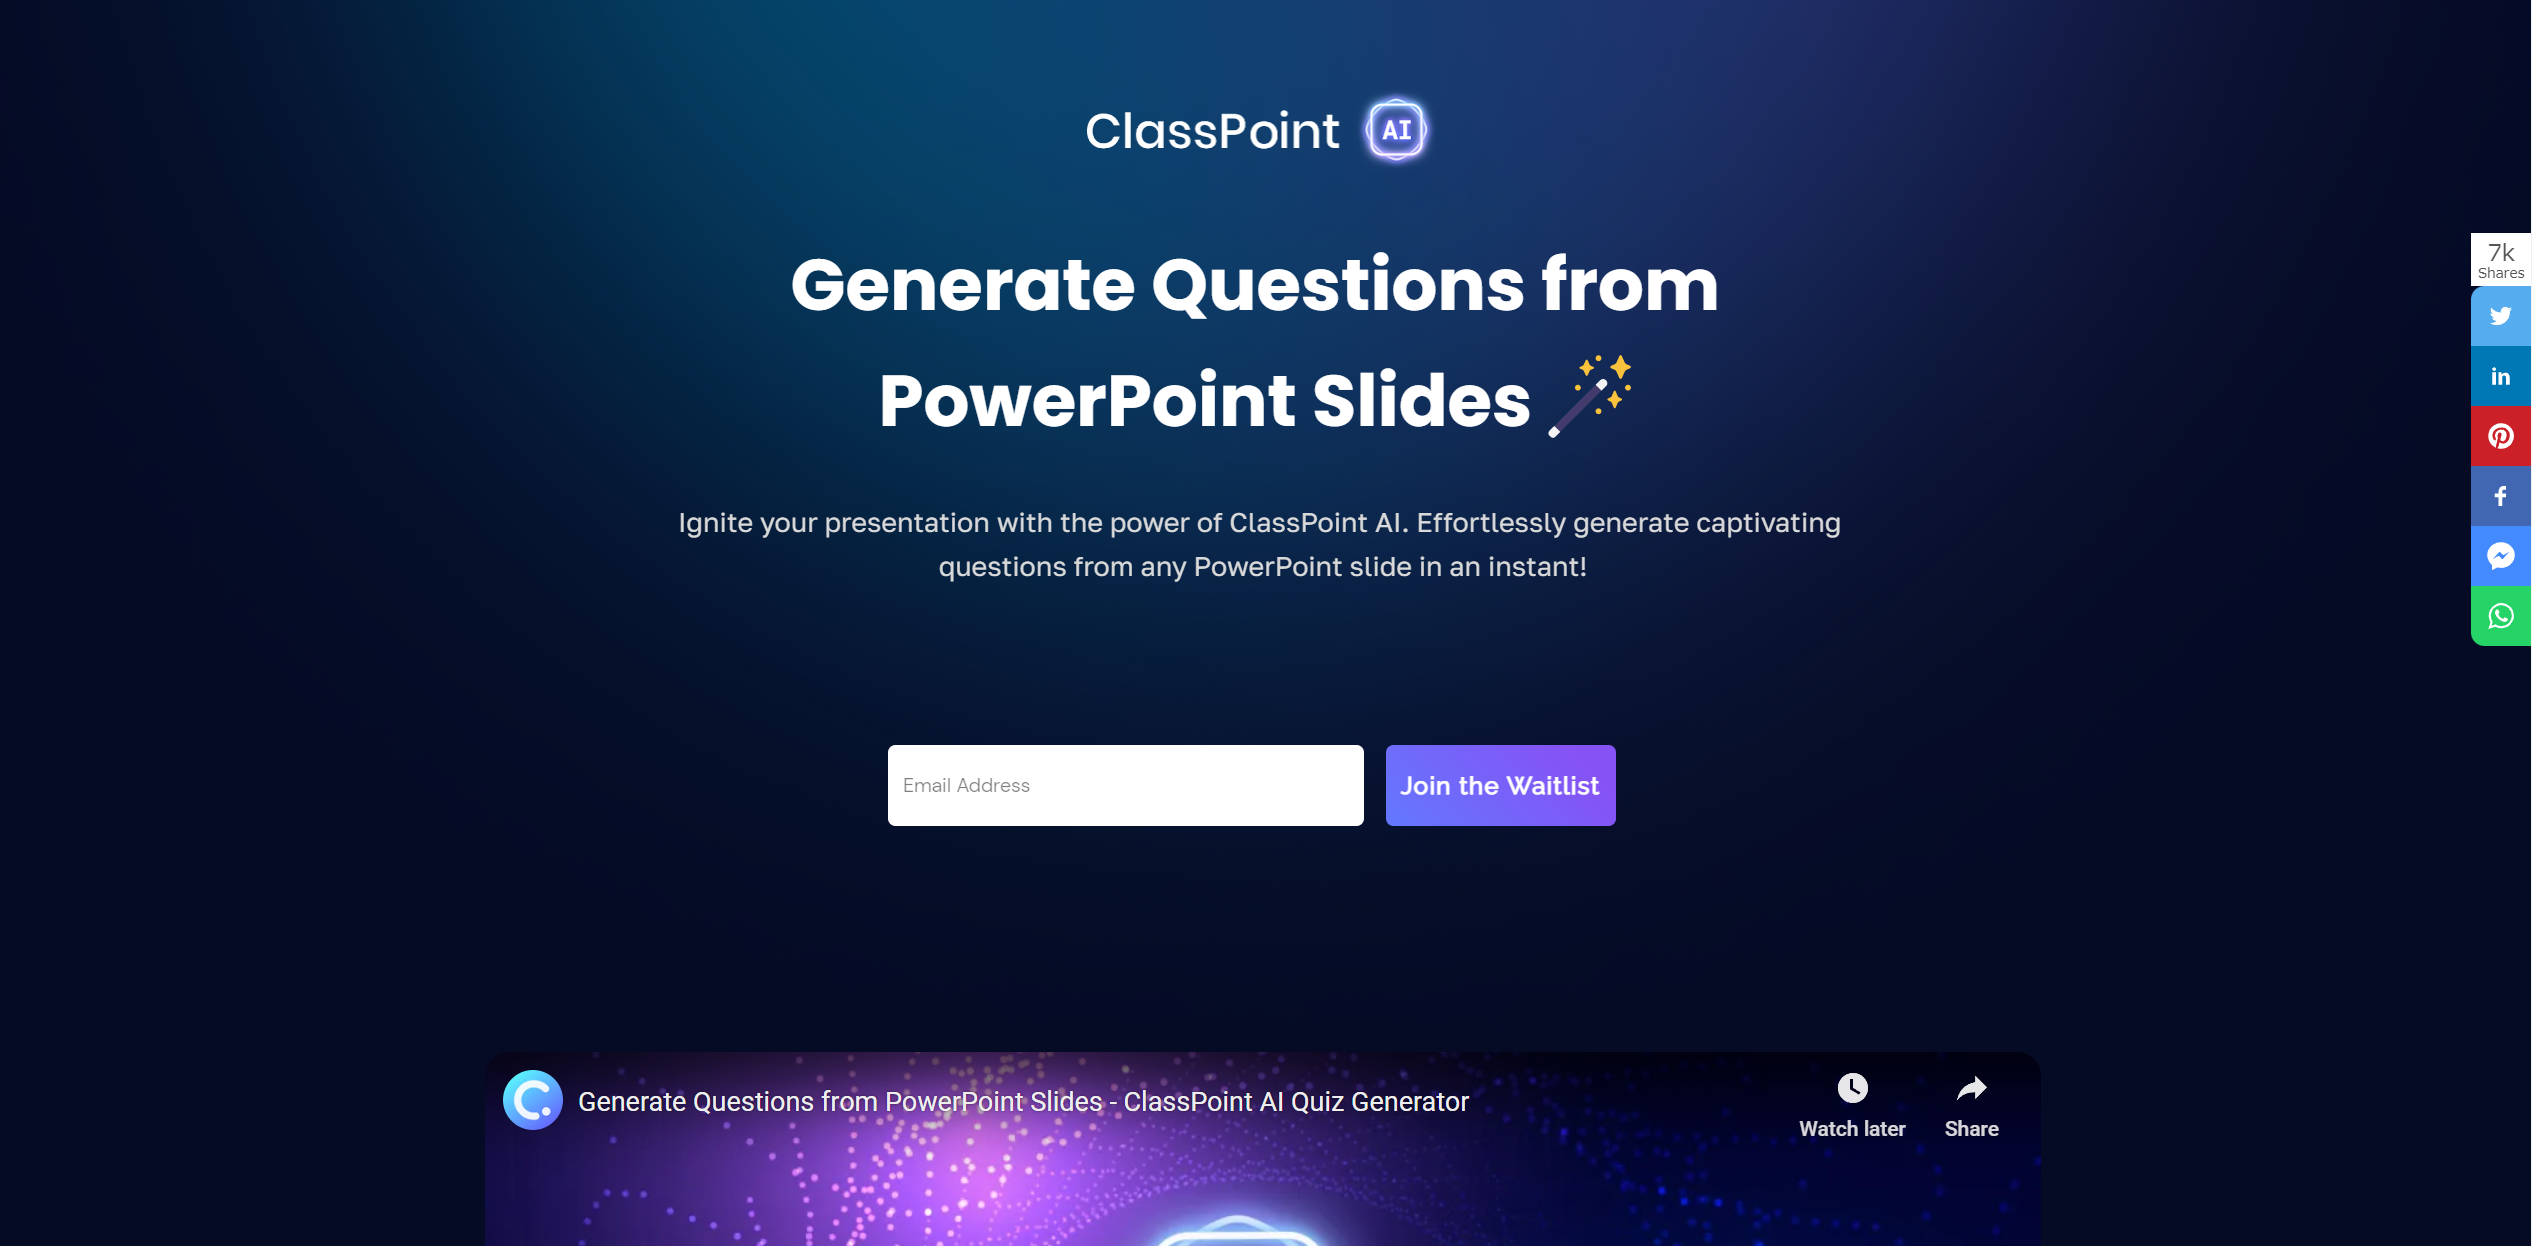  Generate Questions from PowerPoint Slides